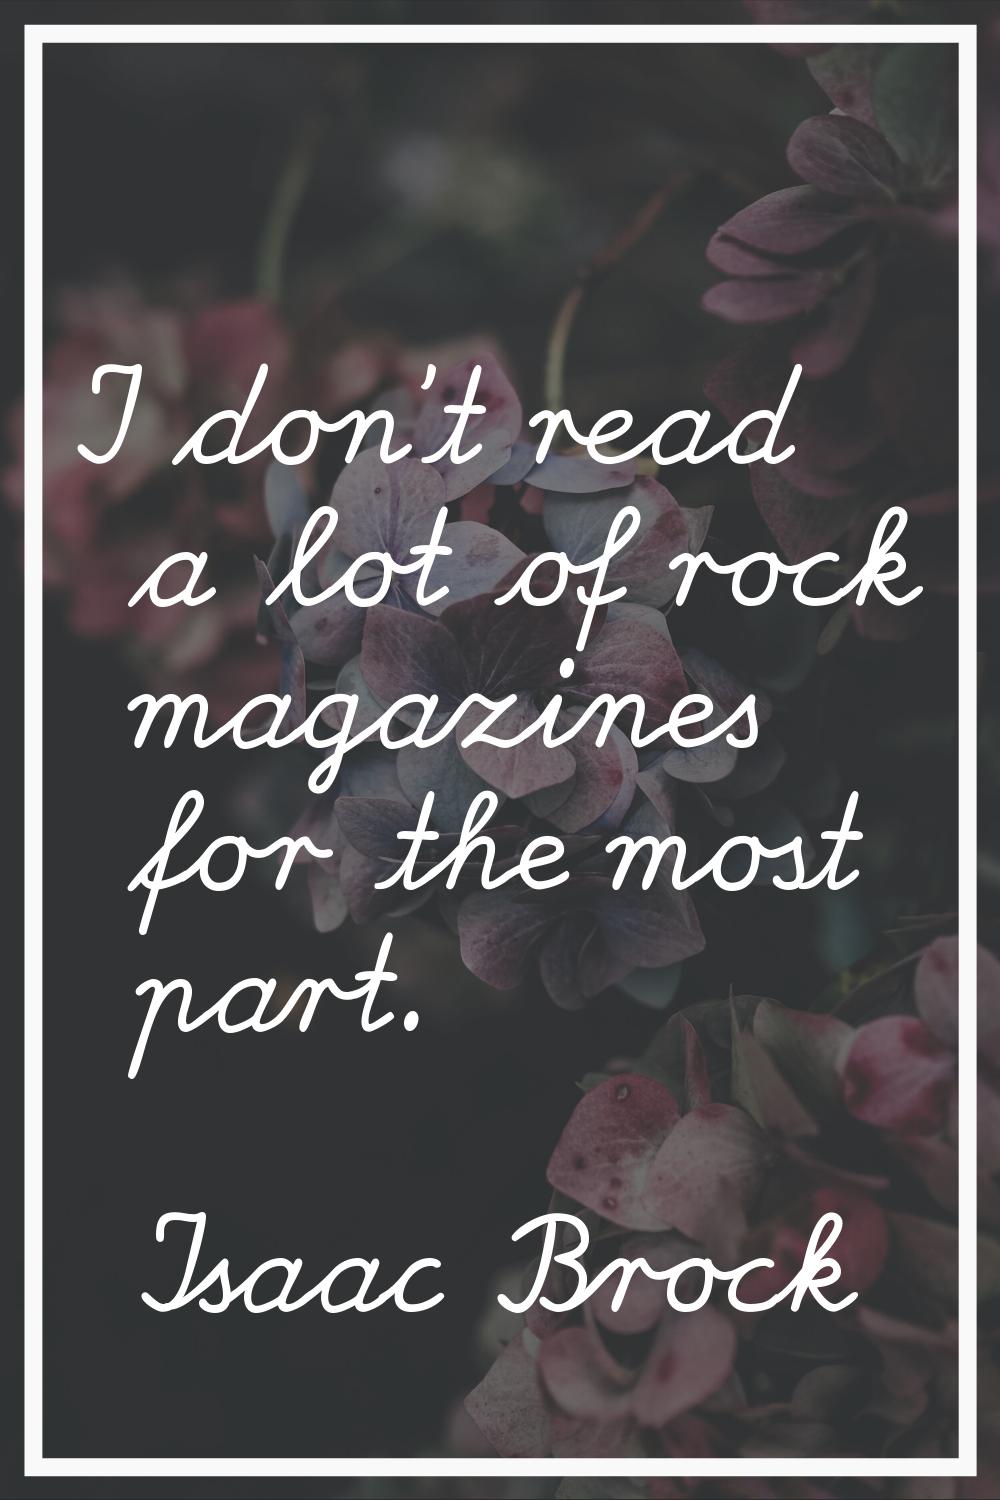 I don't read a lot of rock magazines for the most part.